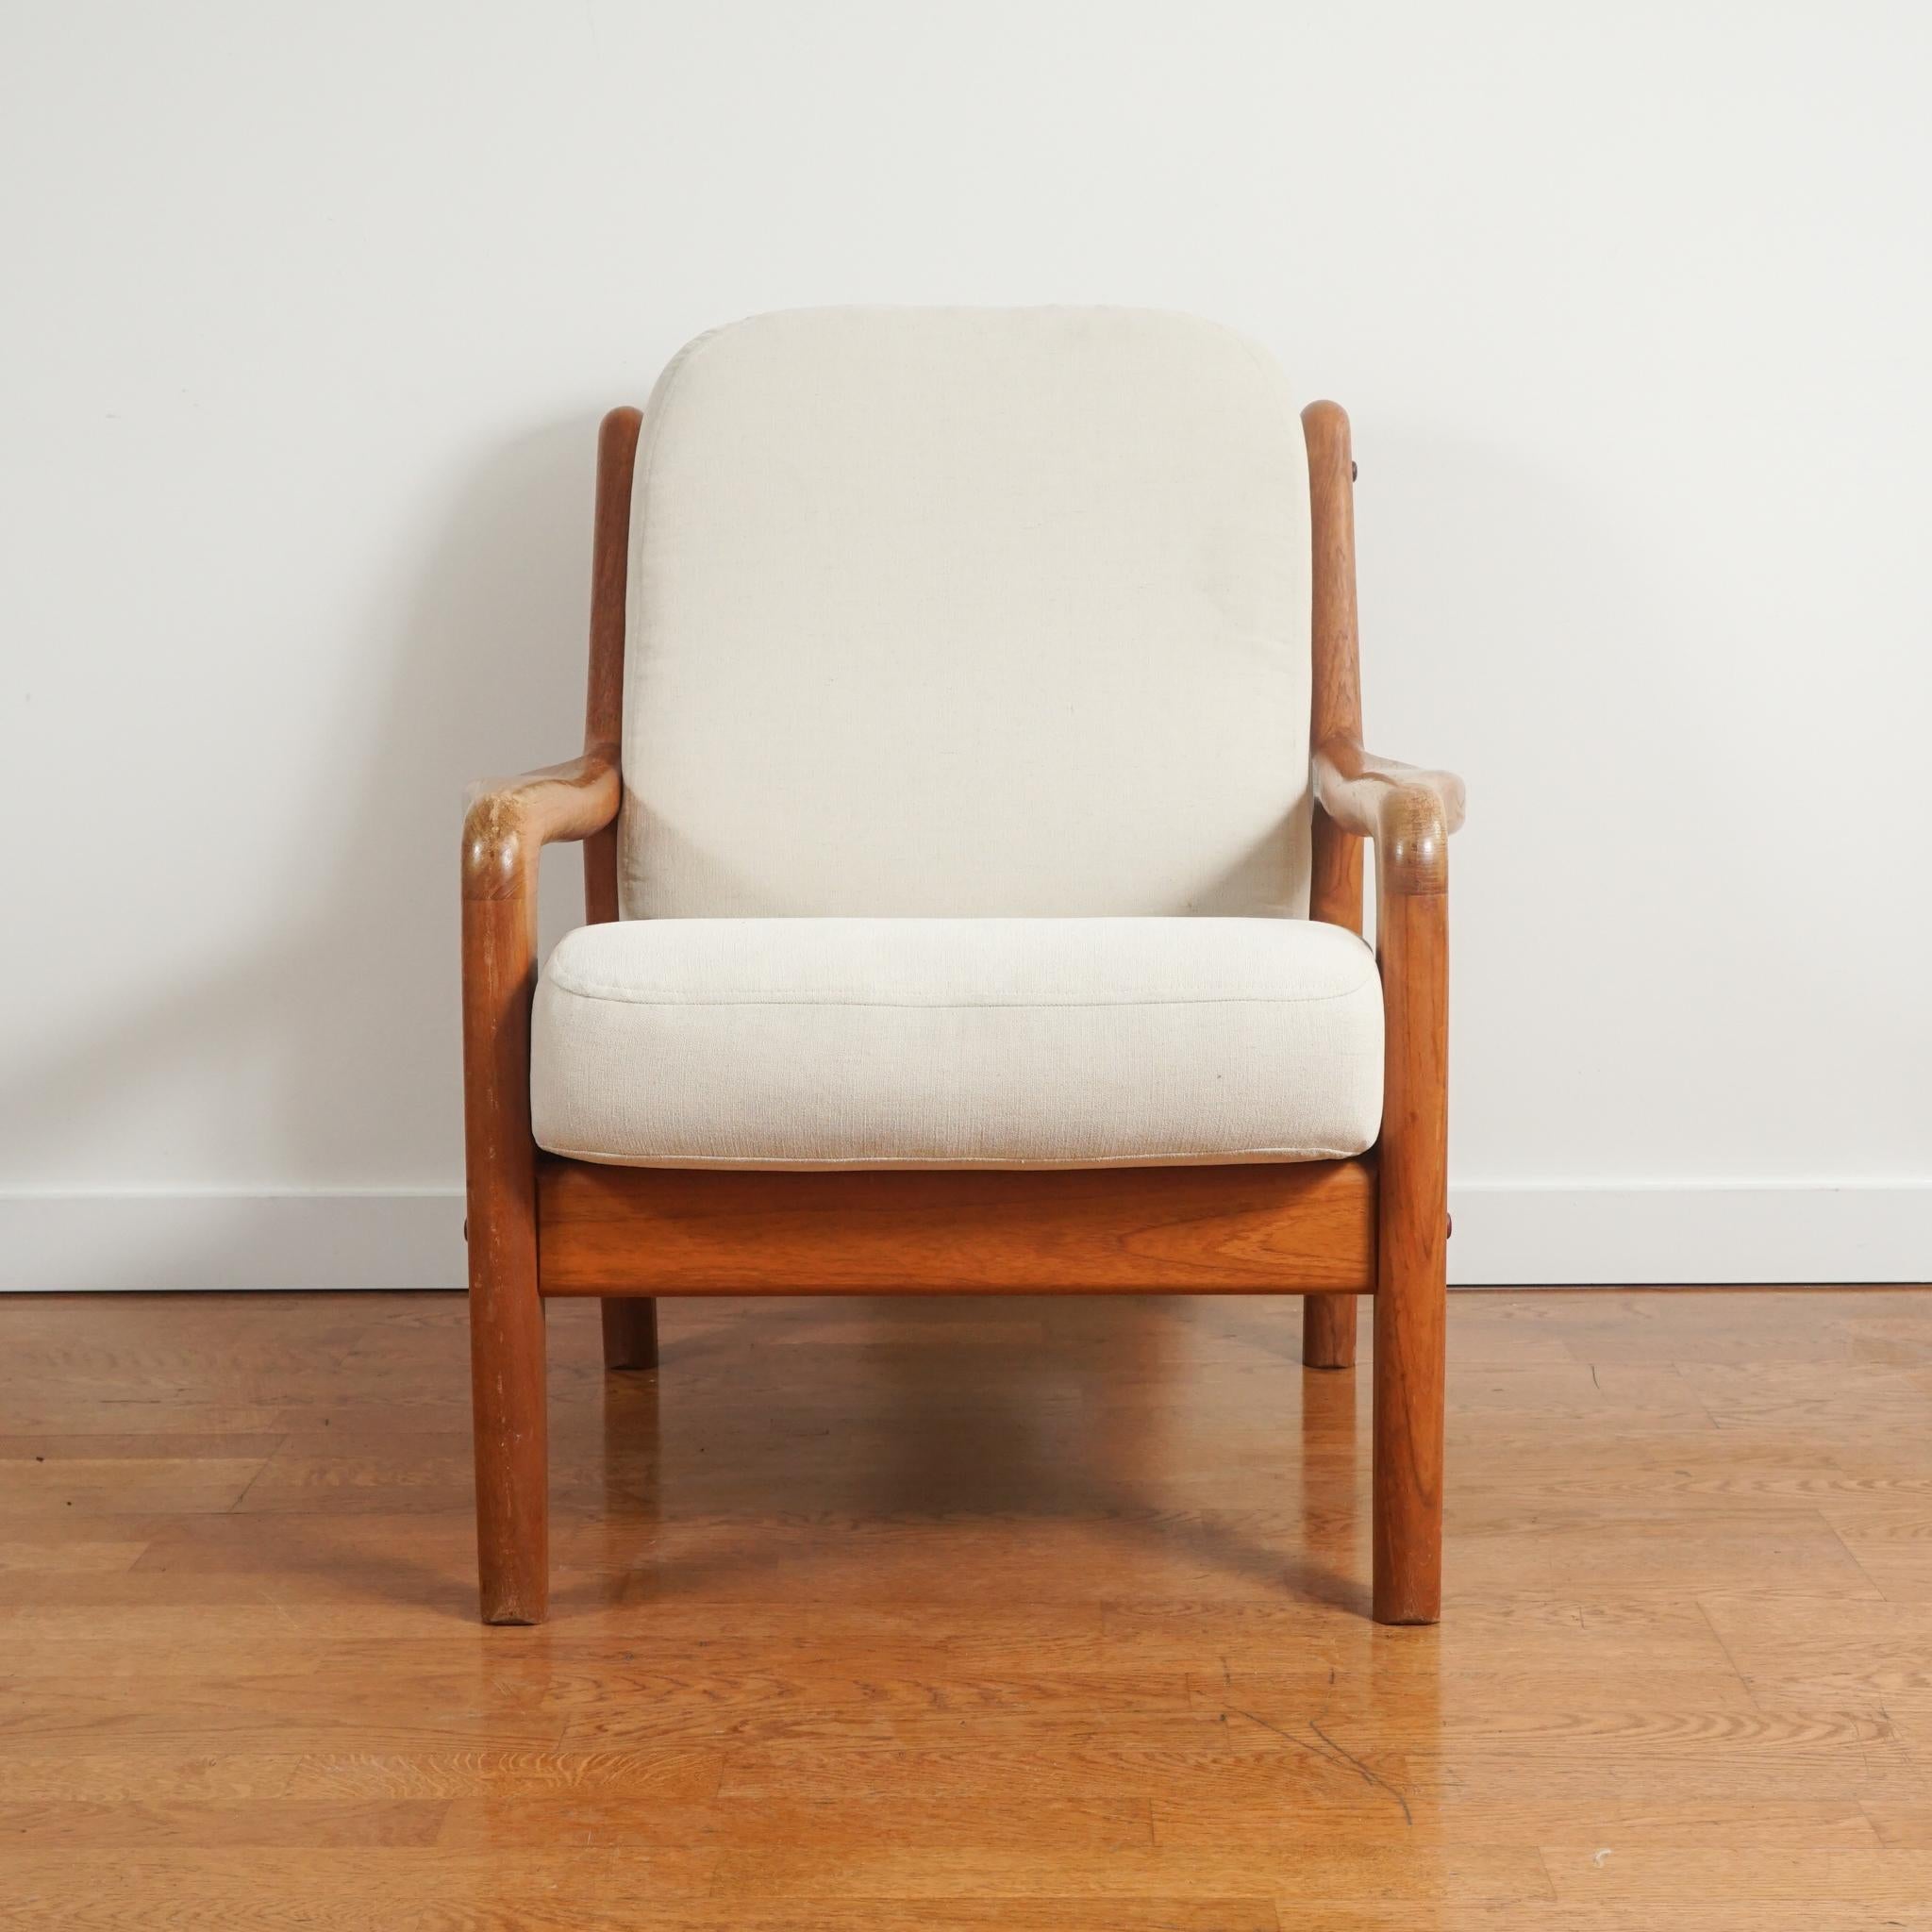 Mid-Century Modern Pair of Mid Century Wood Armchairs with Upholstered Seat Cushions from Denmark